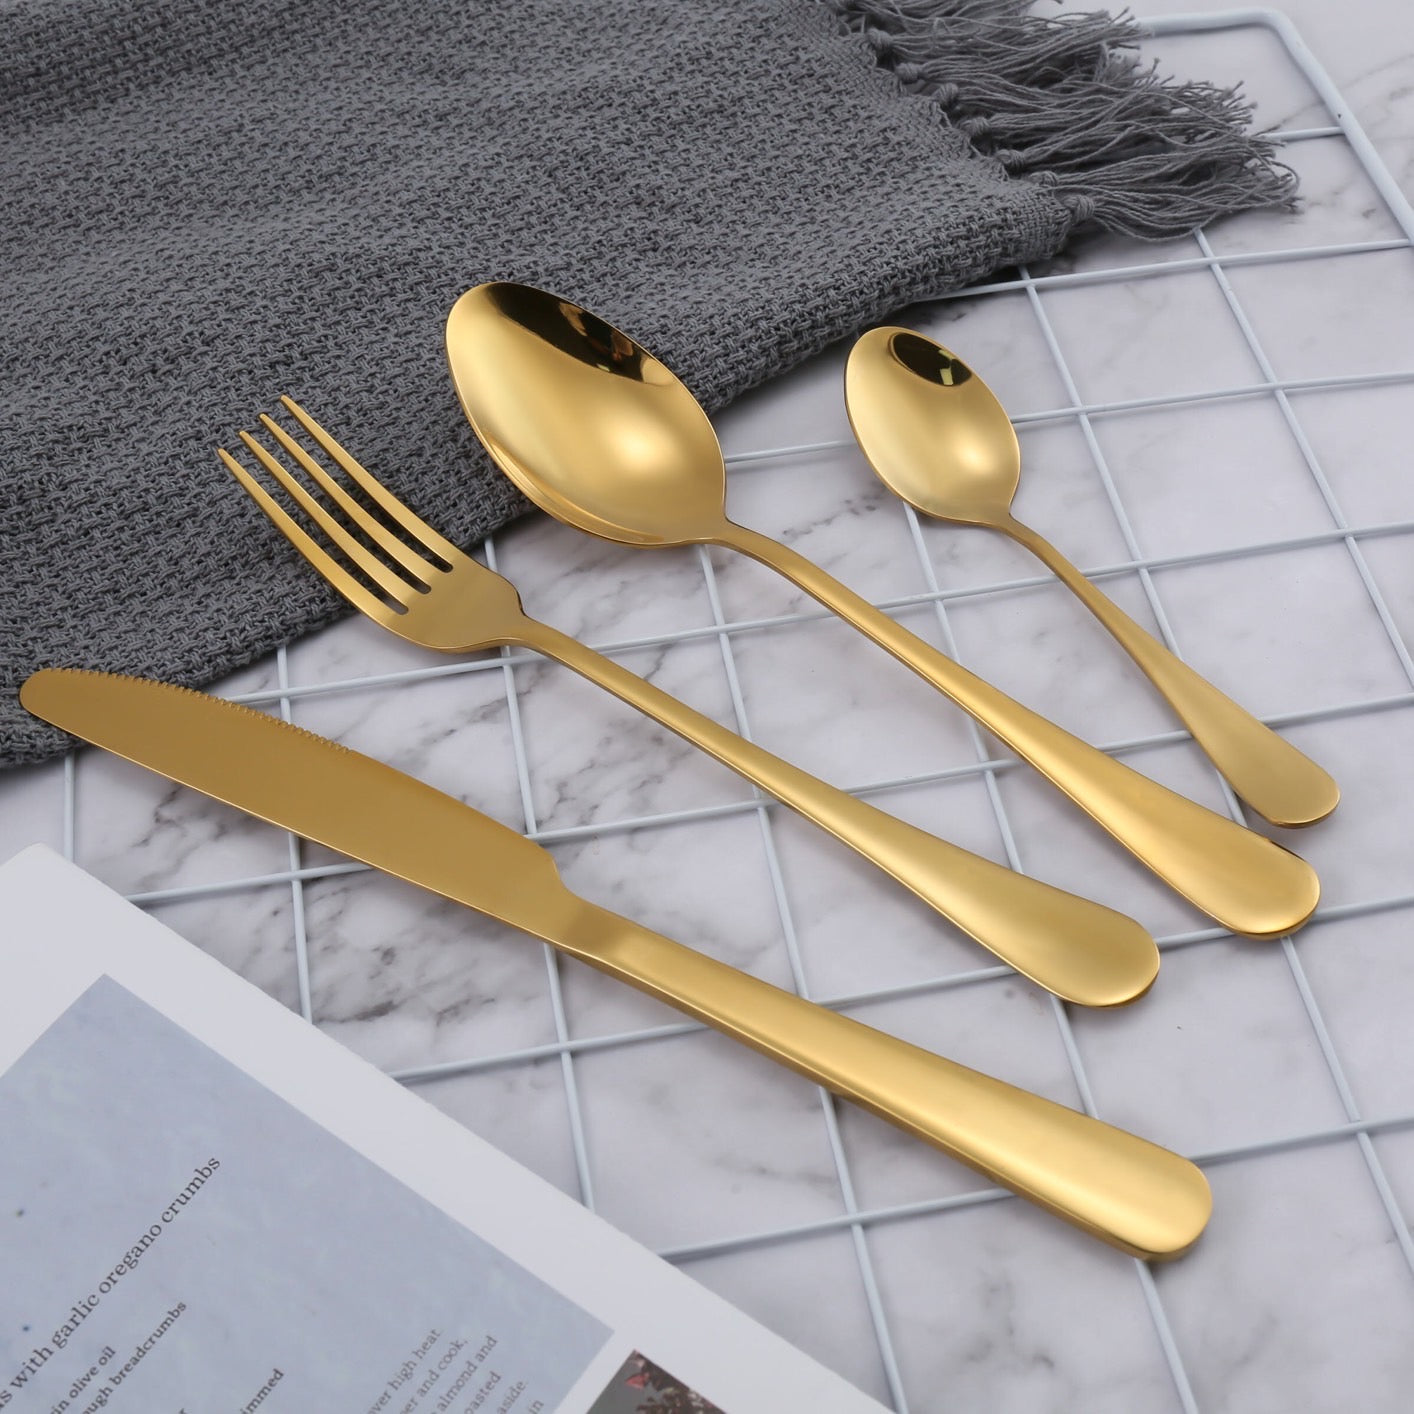 LMA Authentic Cutlery Dinner Set In Golden Box - 24 Piece - Gold